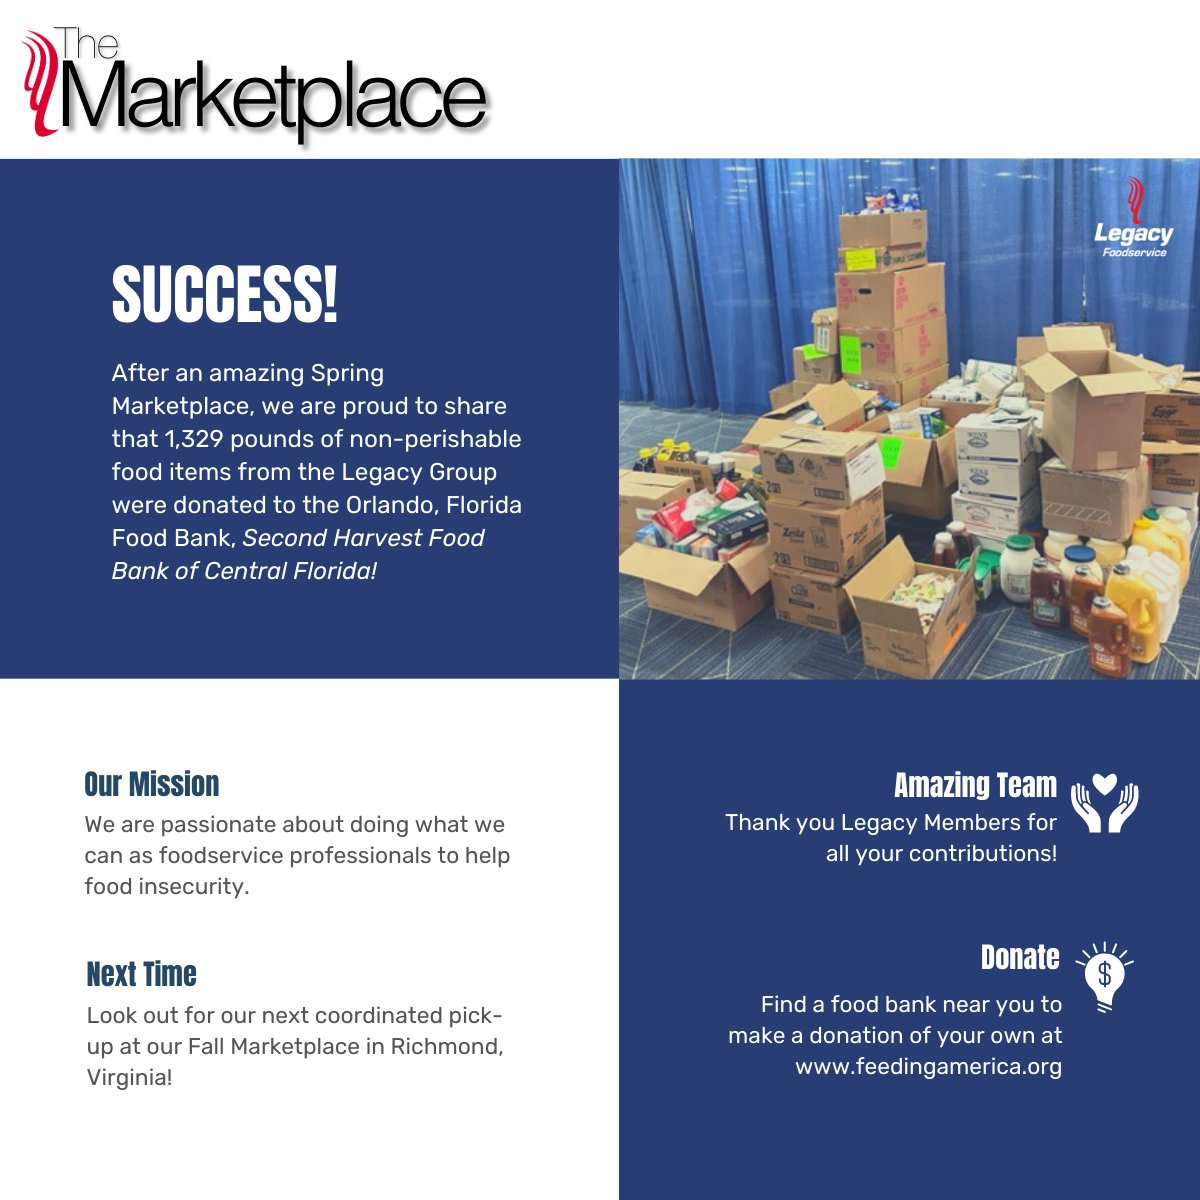 We are always so excited when we get an opportunity to do our part. Thanks for helping us reach our donation goals at our Spring Marketplace!  #legacyfoodservice #feedamerica #foodinsecurity